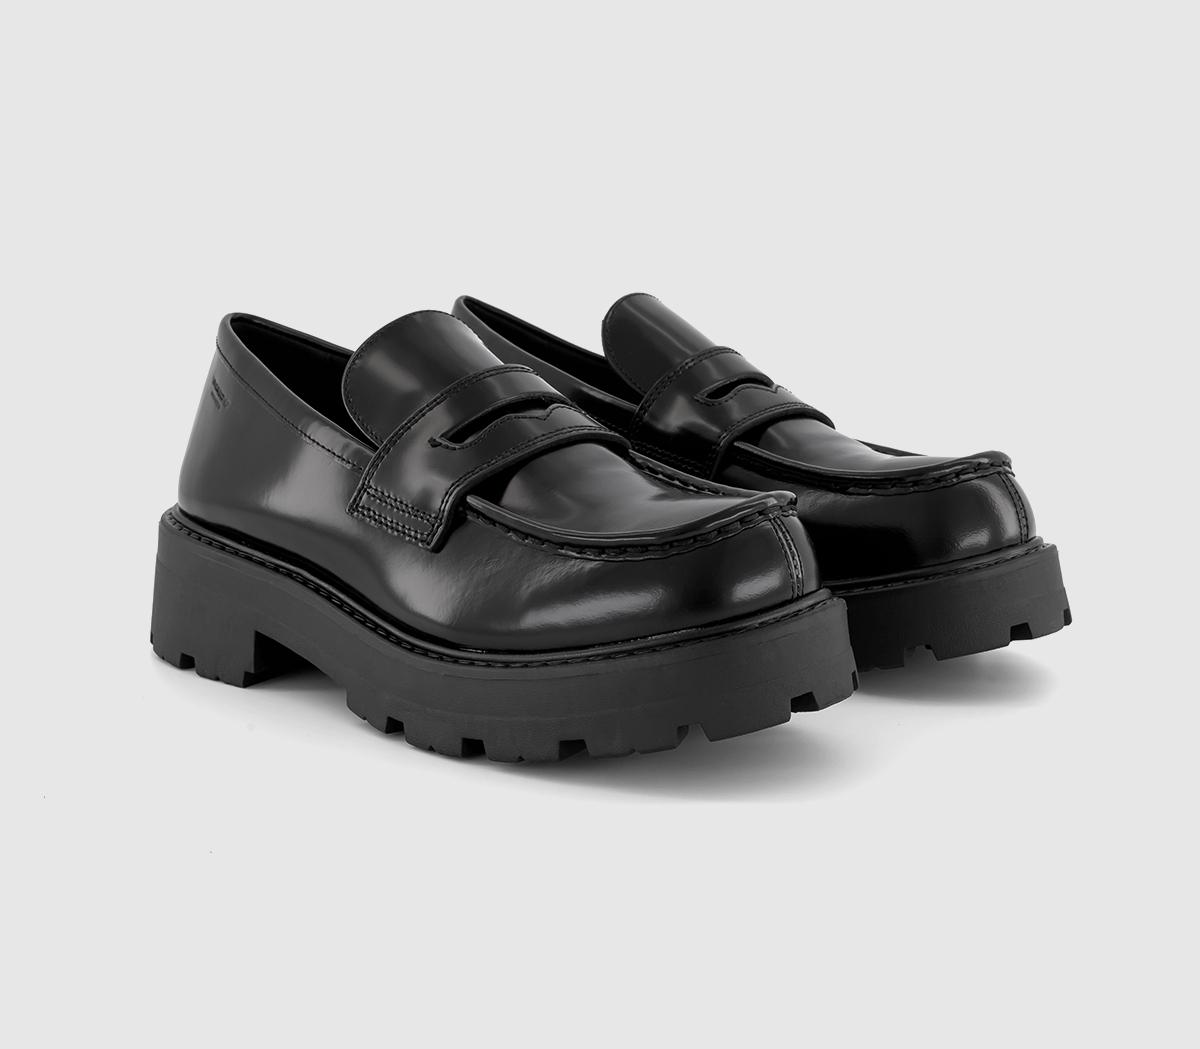 Vagabond Womens Cosmo Loafers Black Leather, 7